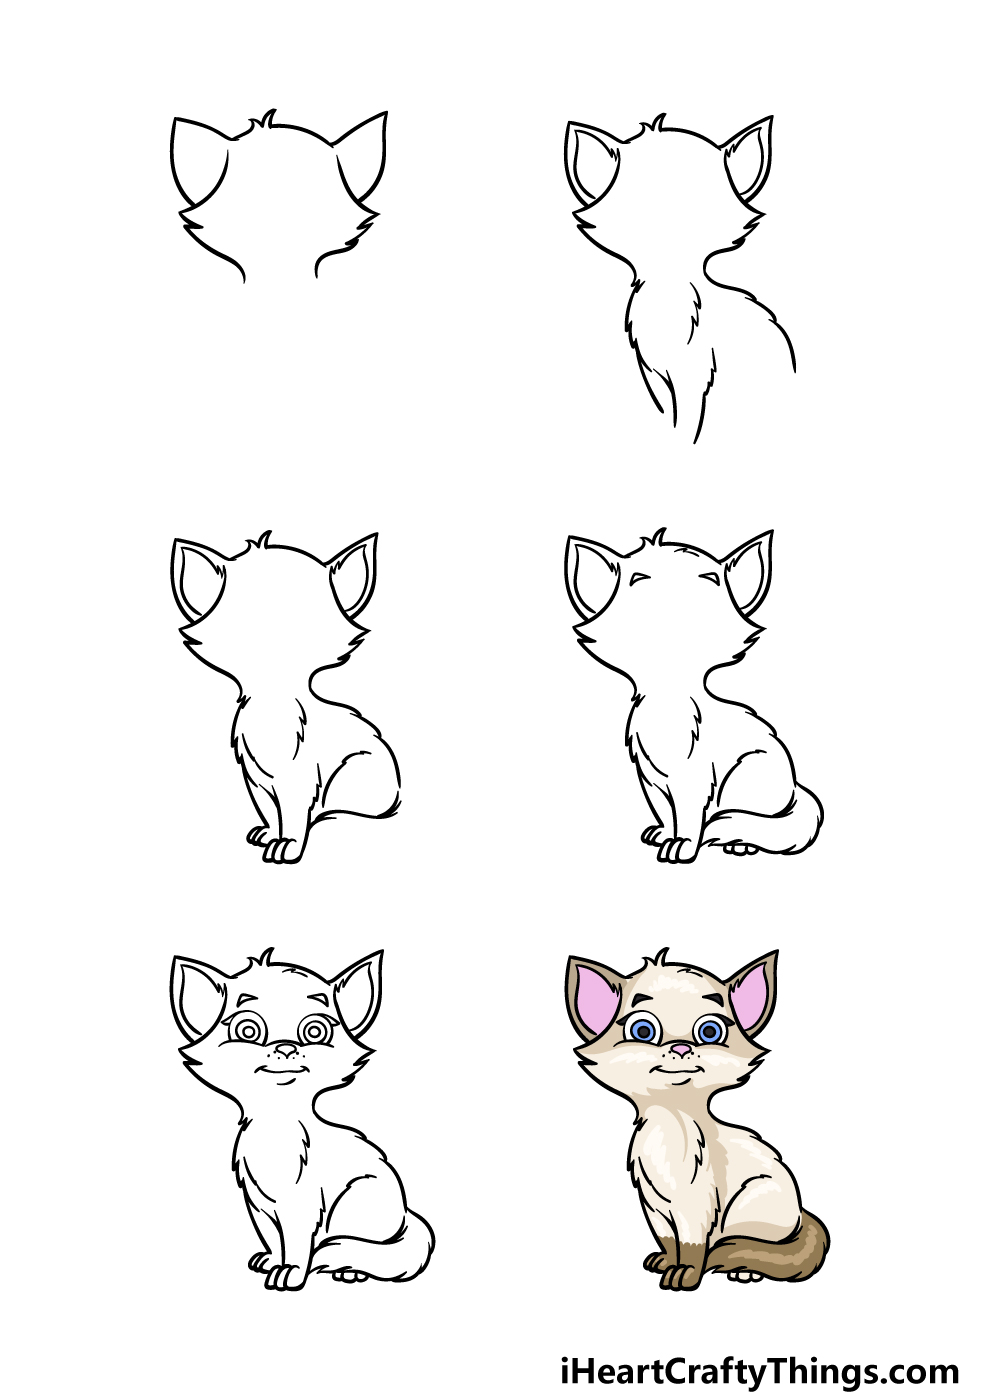 Cartoon Cat Drawing - How To Draw A Cartoon Cat Step By Step